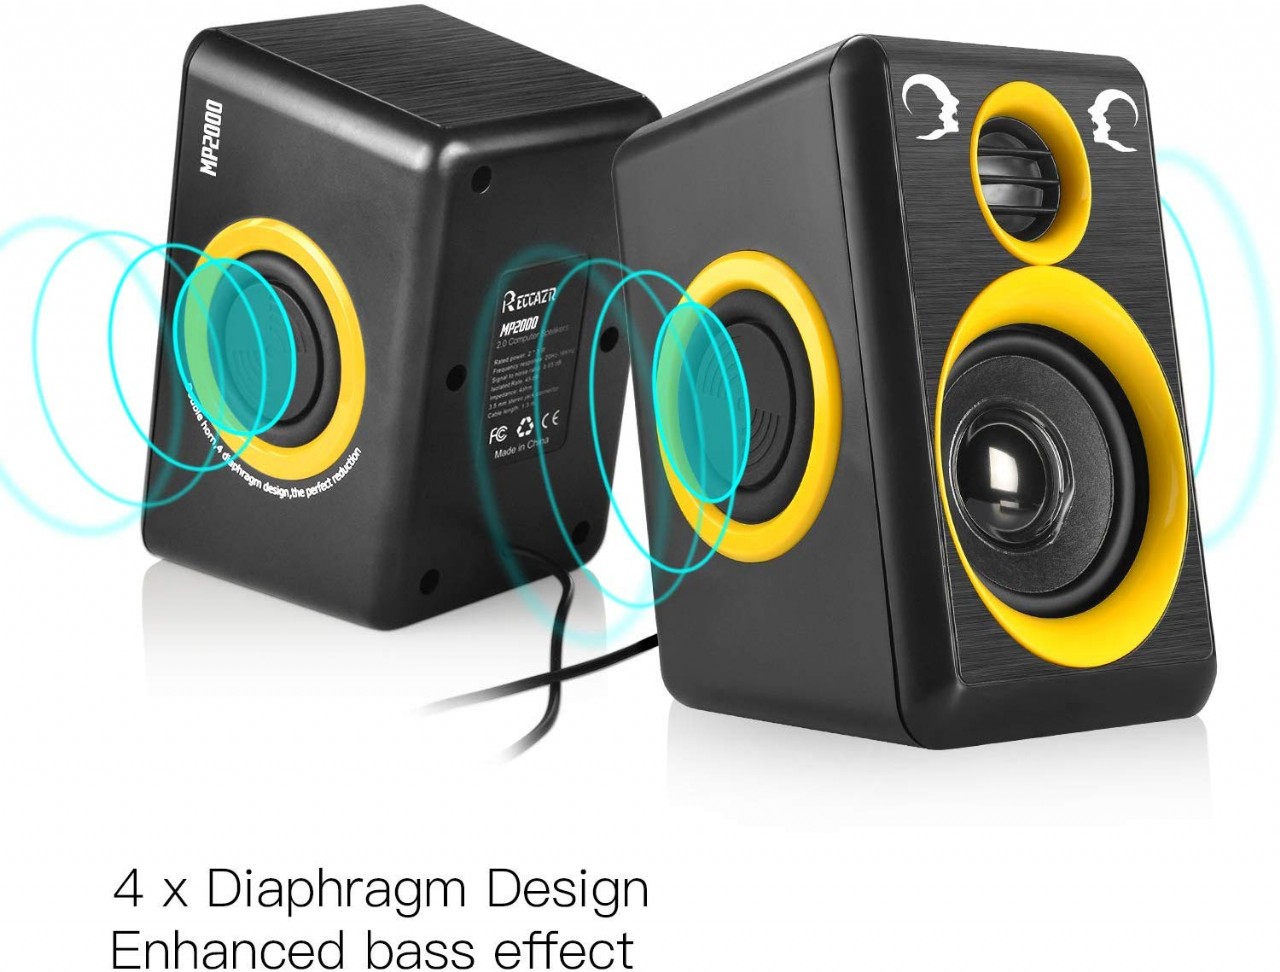 Subwoofer Computer Speakers, Reccazr MP2000 Stereo 2.0 Wired Multimedia Speakers, USB Powered 3.5mm